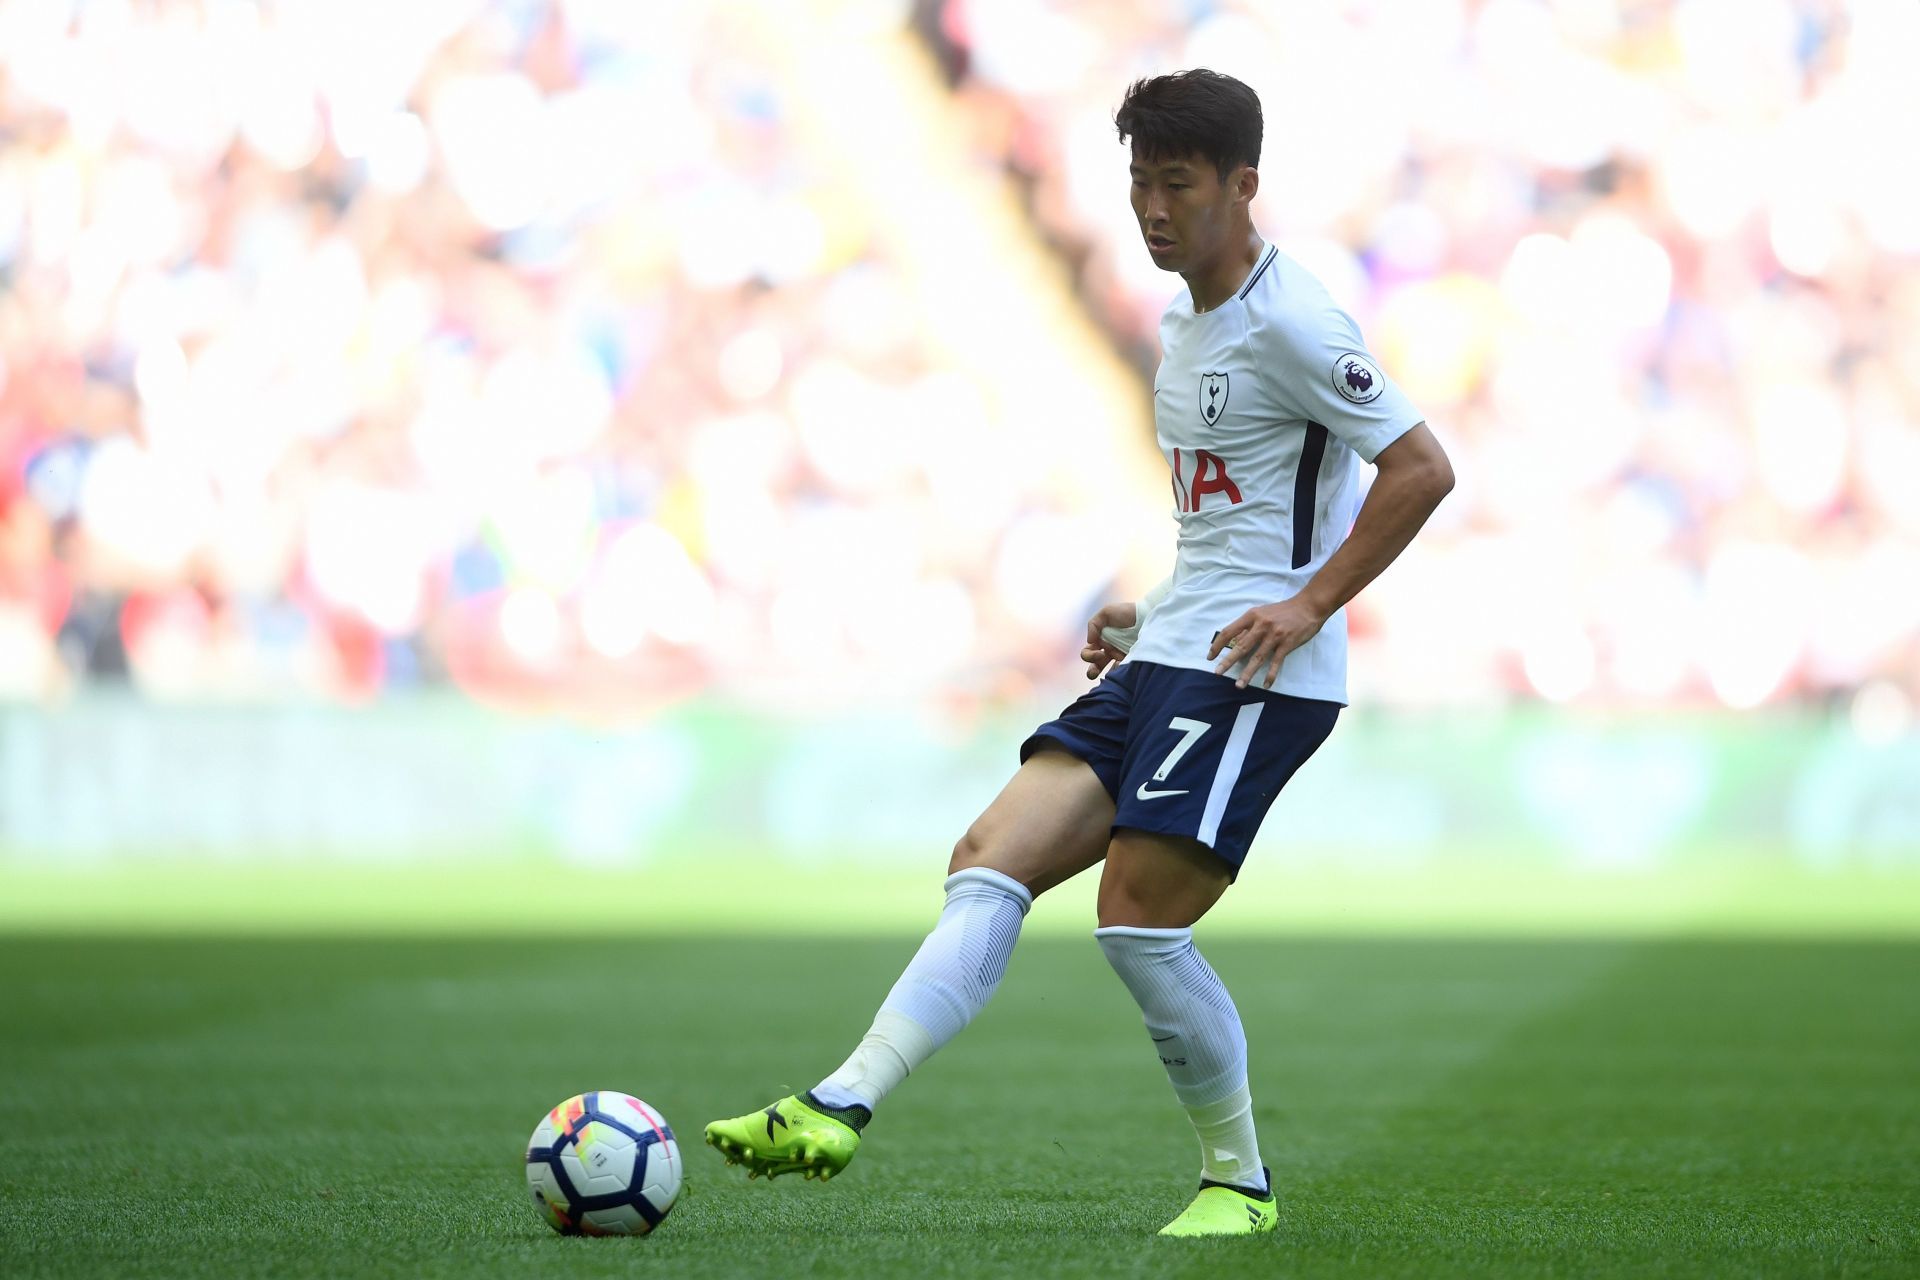 Son Heung-min has scored a lot of goals in the Premier League.